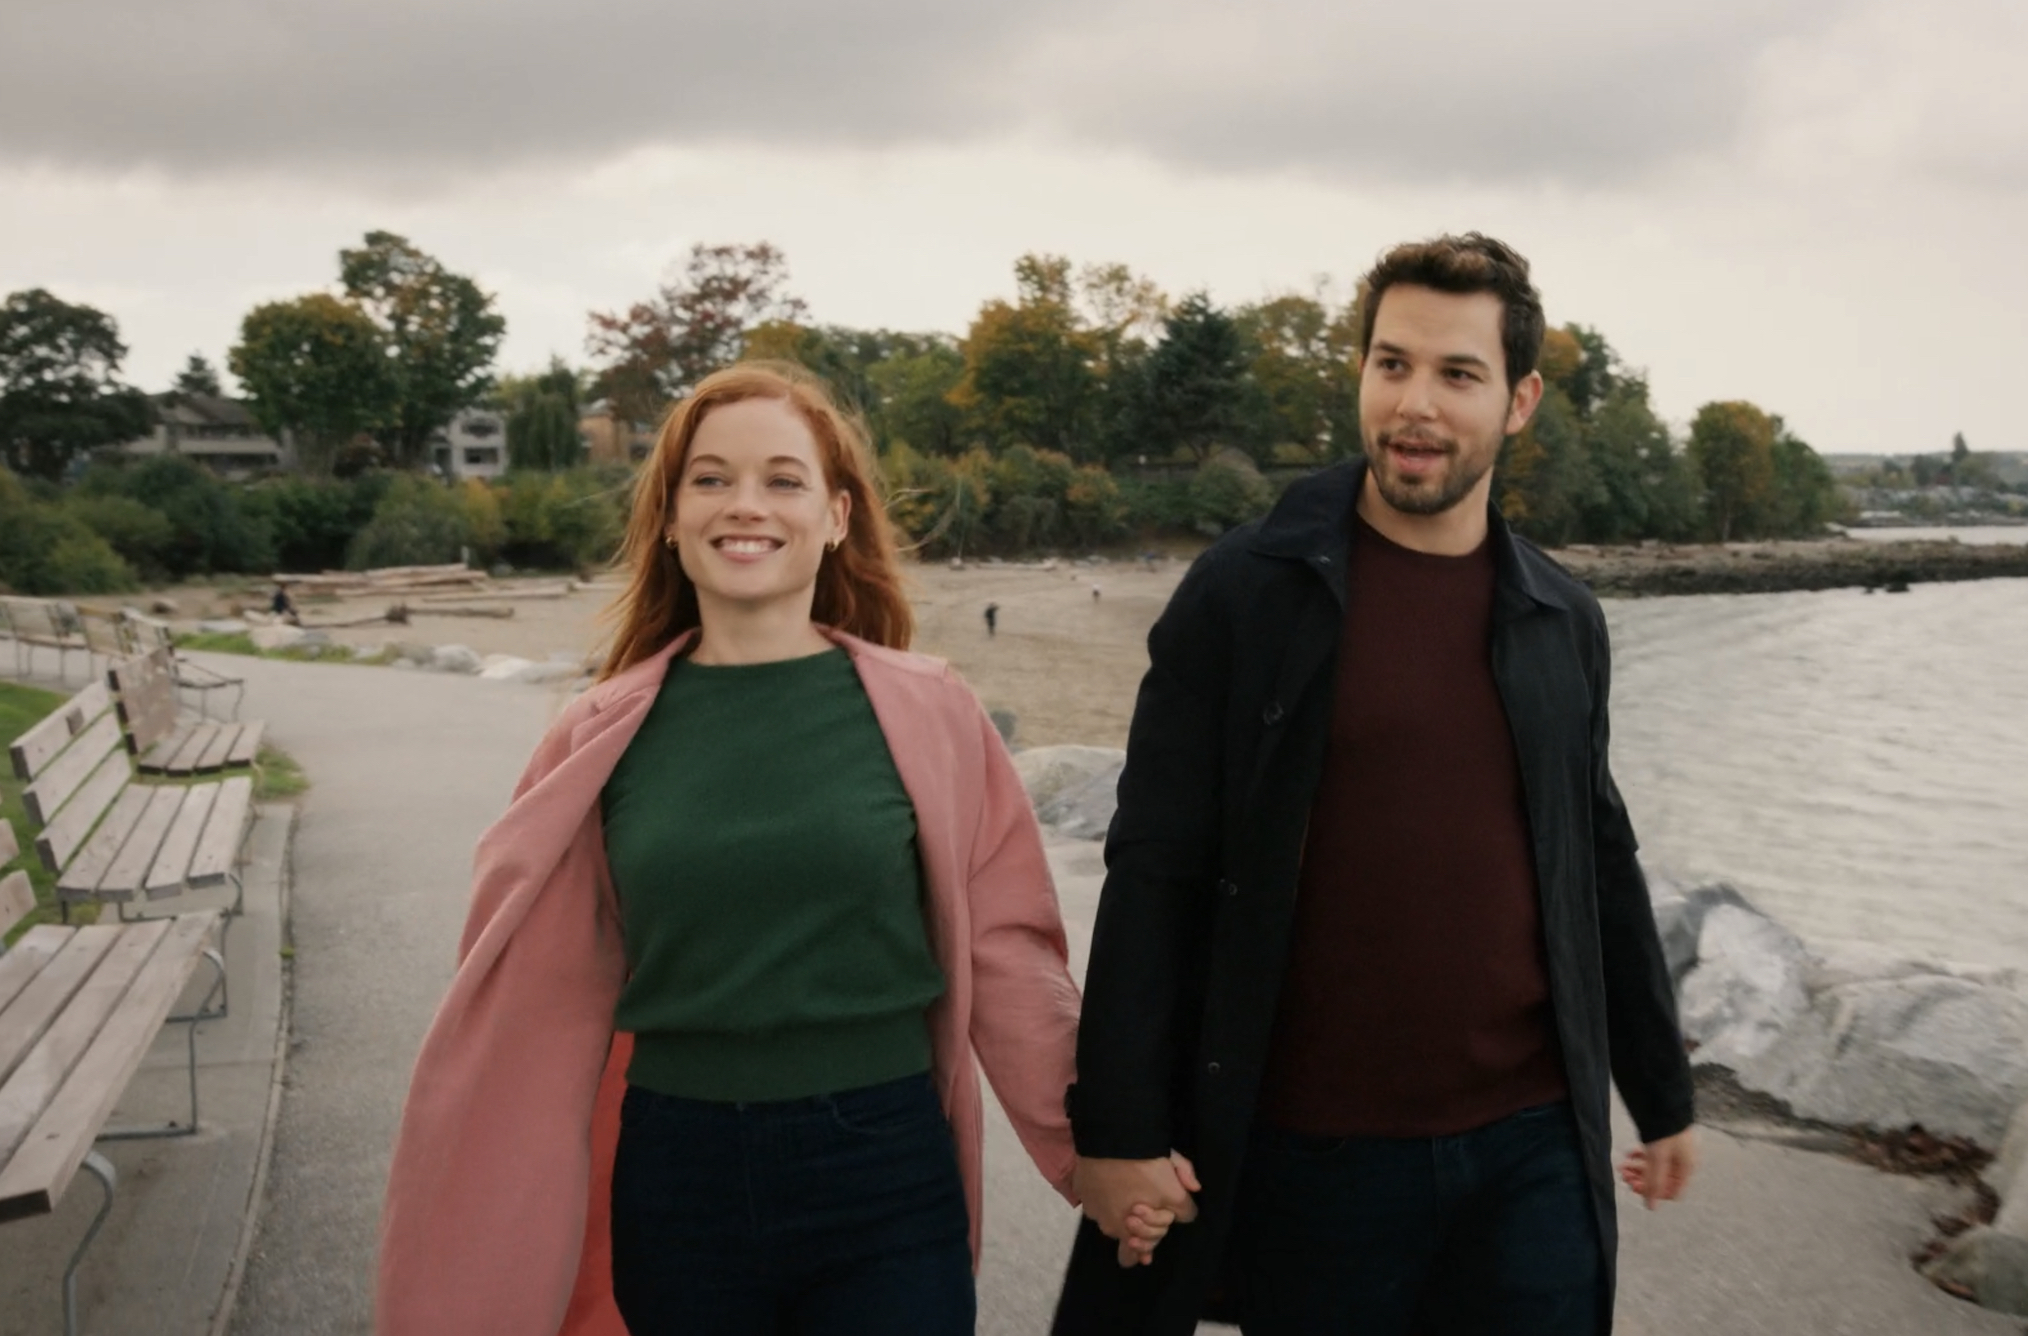 Jane Levy as Zoey, Skylar Astin as Max in Zoey's Extraordinary Christmas